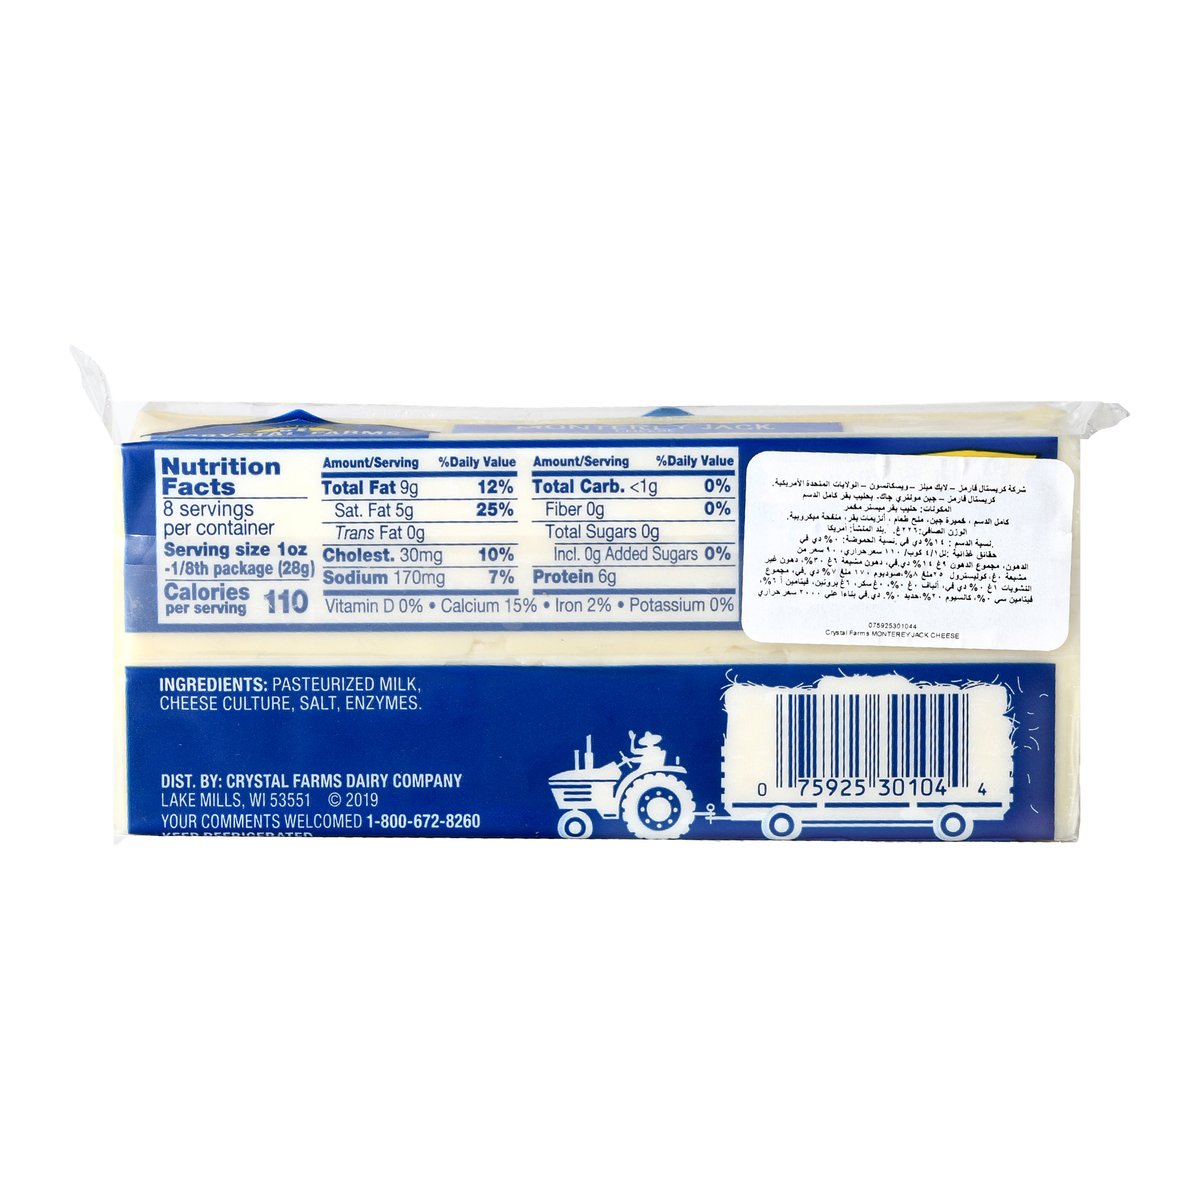 Crystal Farms Monterey Jack Cheese 226 g